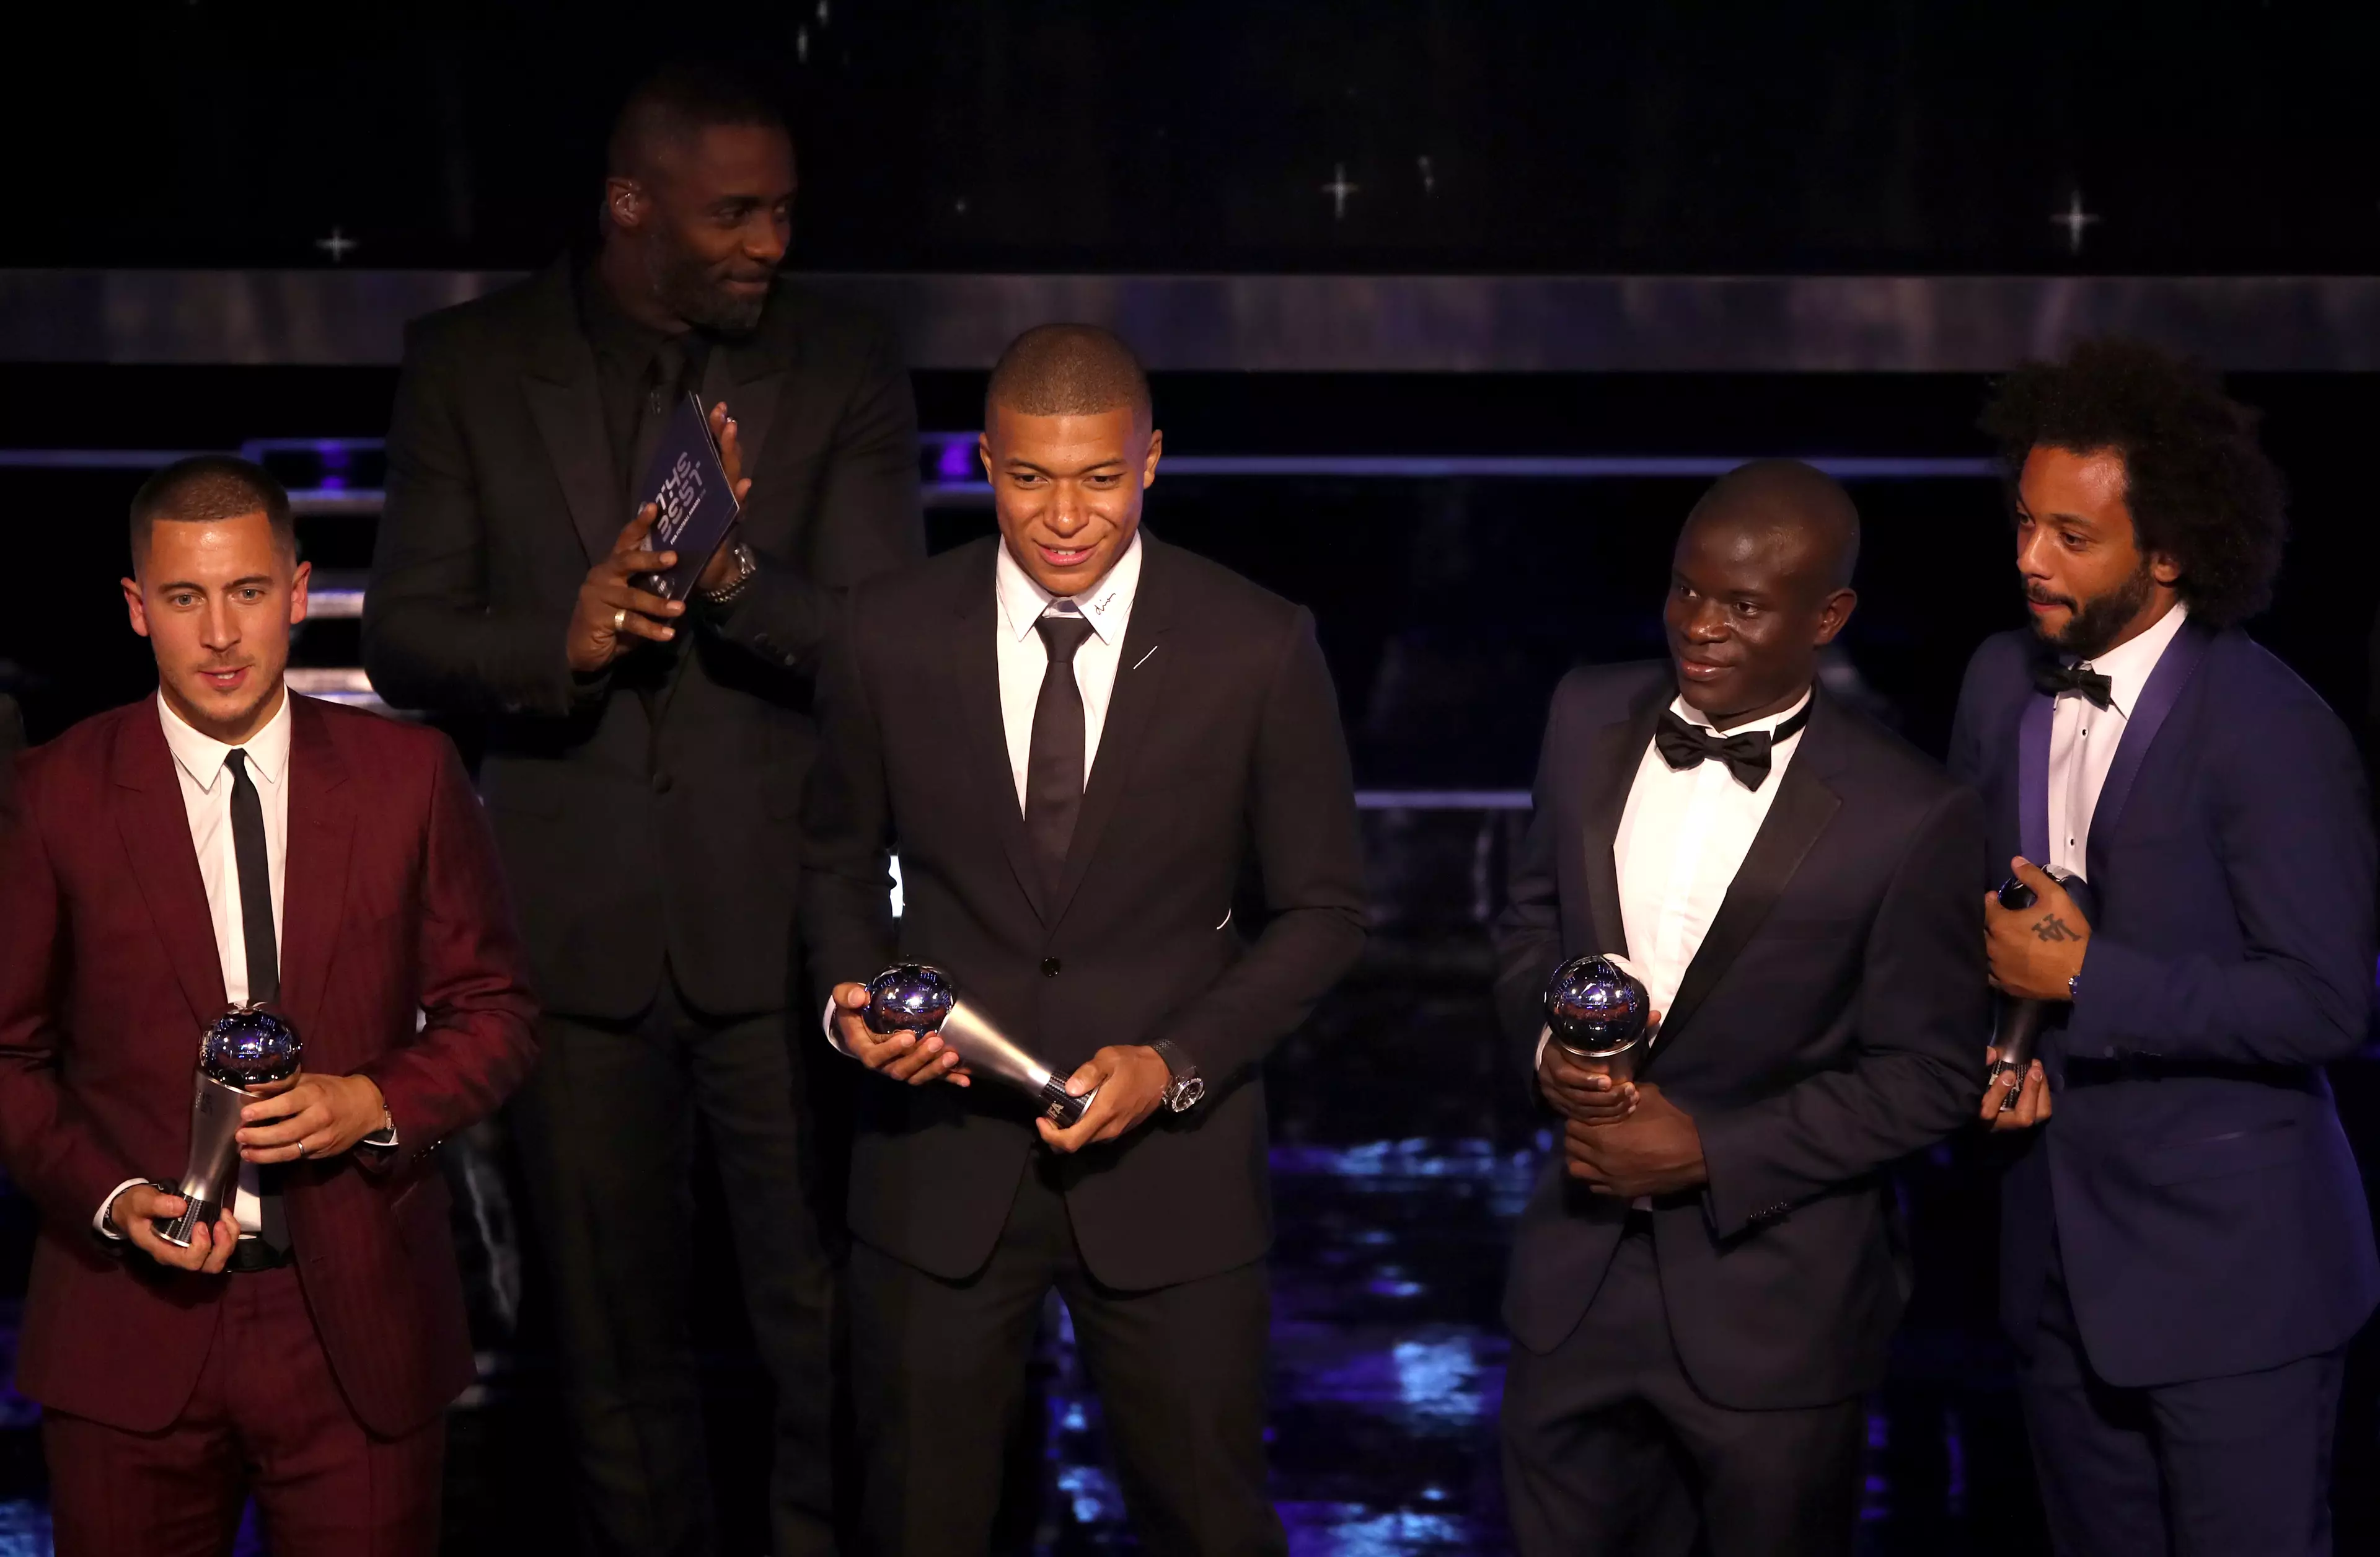 Hazard picks up his award alongside the rest of the team. Image: PA Images